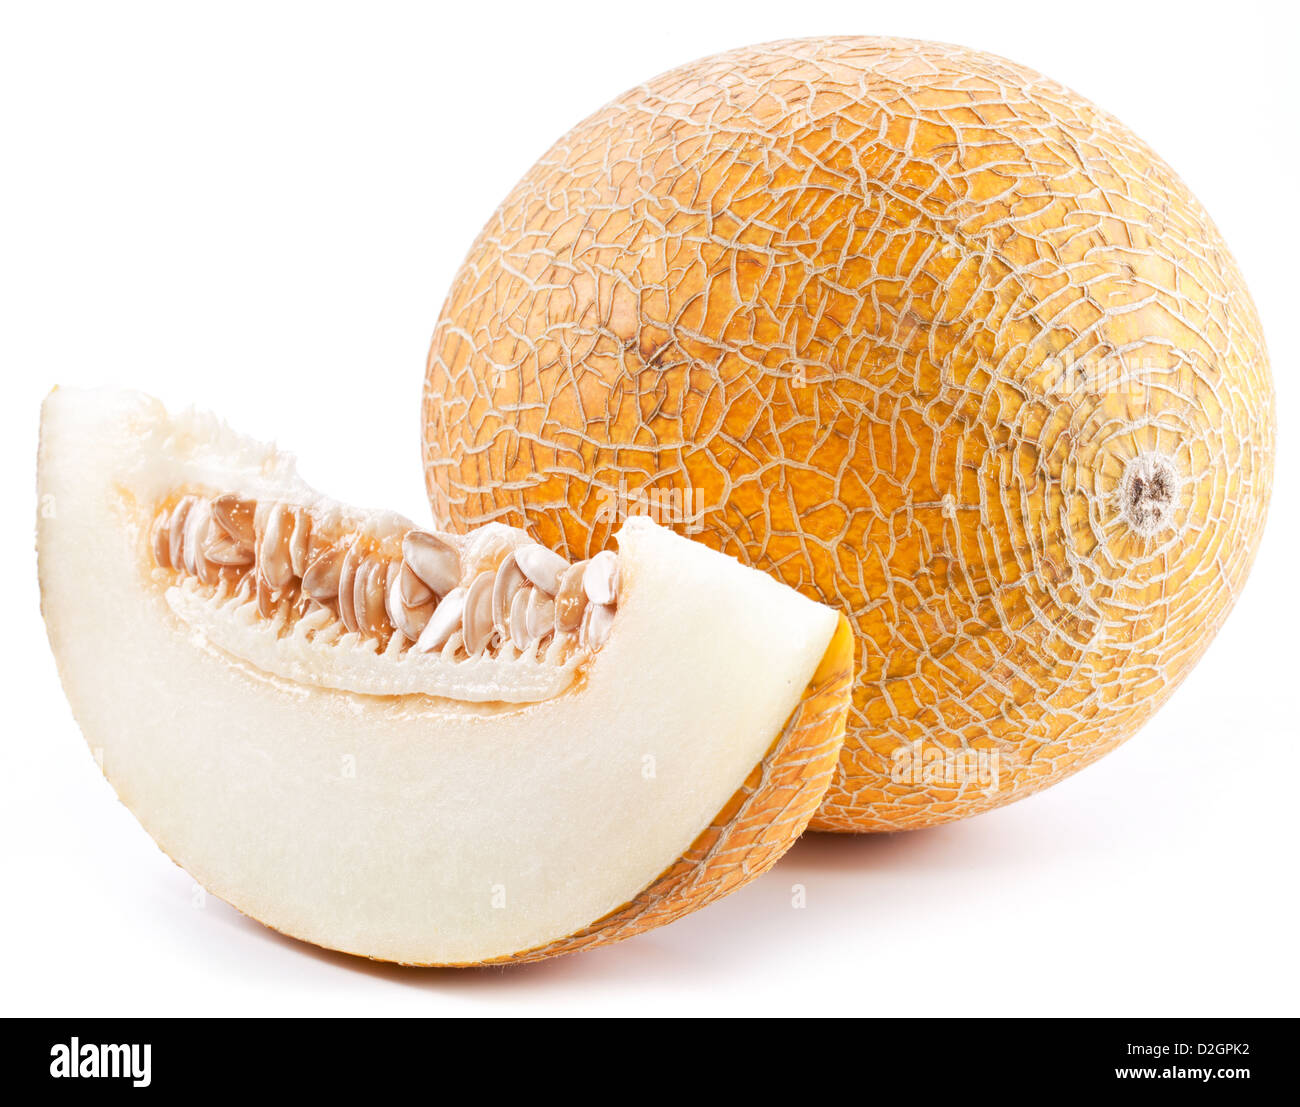 Melon with slices and leaves on a white background. Stock Photo